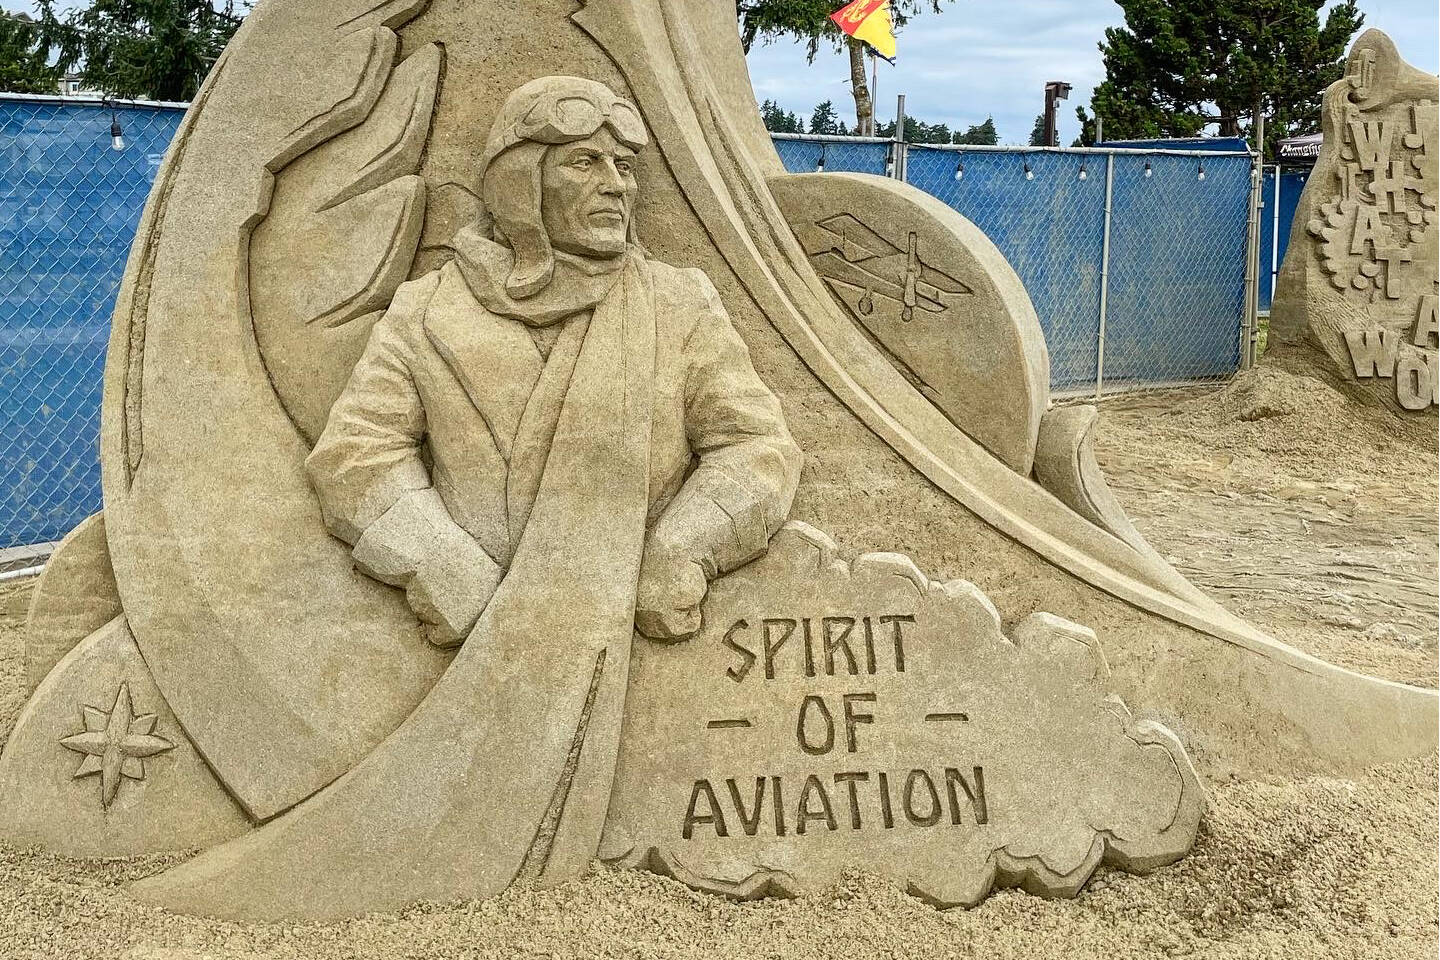 One of the spectacular sculptures in this year's Quality Foods Sand Sculpting Competition, a focal point of the Parksville Beach Festival. See the sculptures at Parksville Community Park through Aug. 21. Photos courtesy Parksville Beach Festival